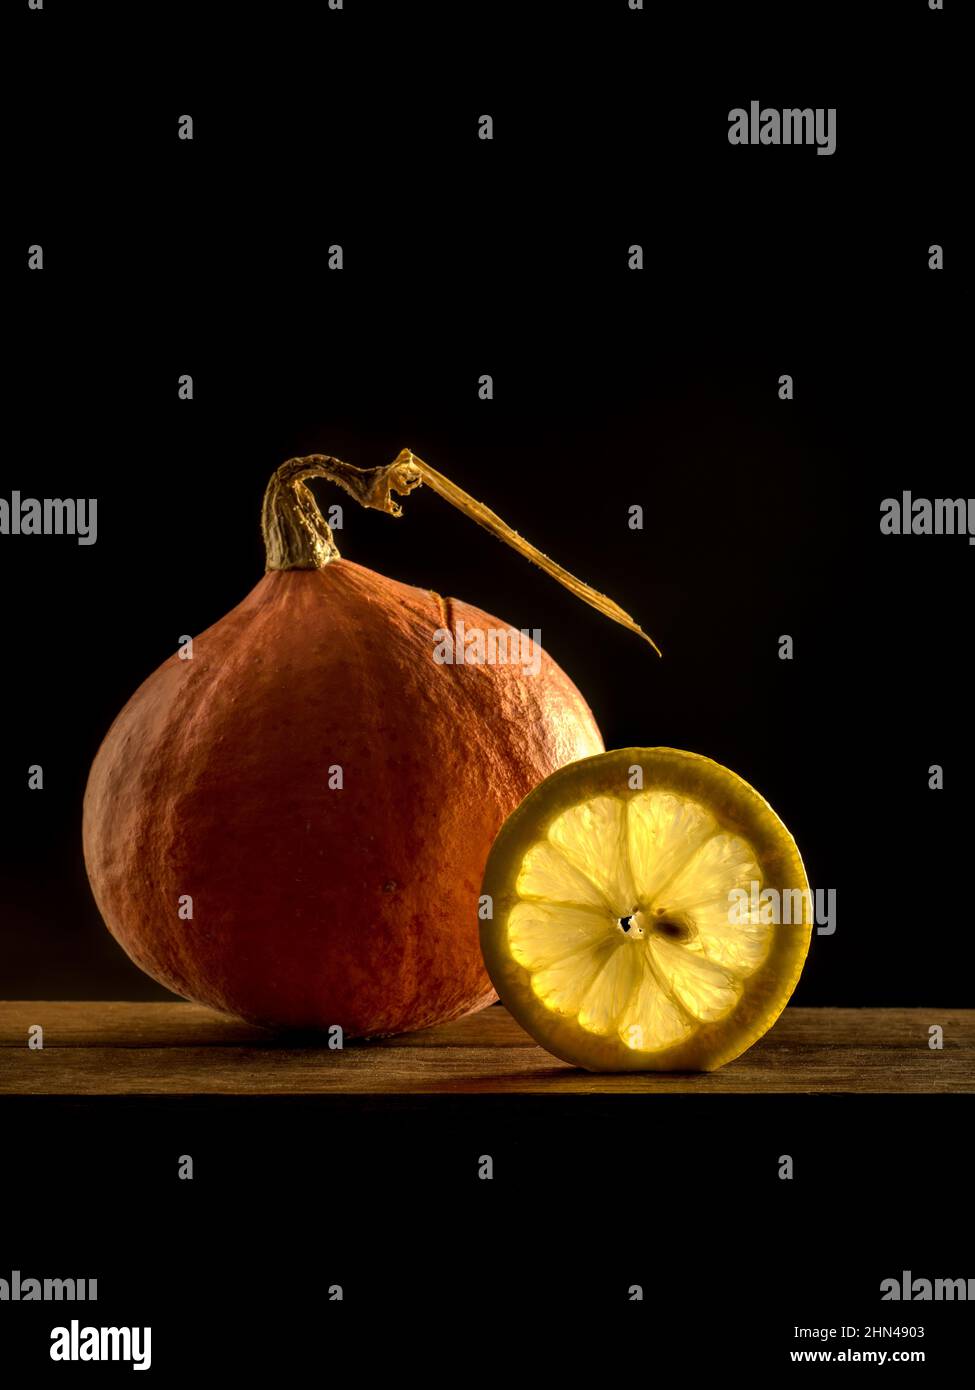 still life showing a pumpkin and a slice of lemon on a black background Stock Photo